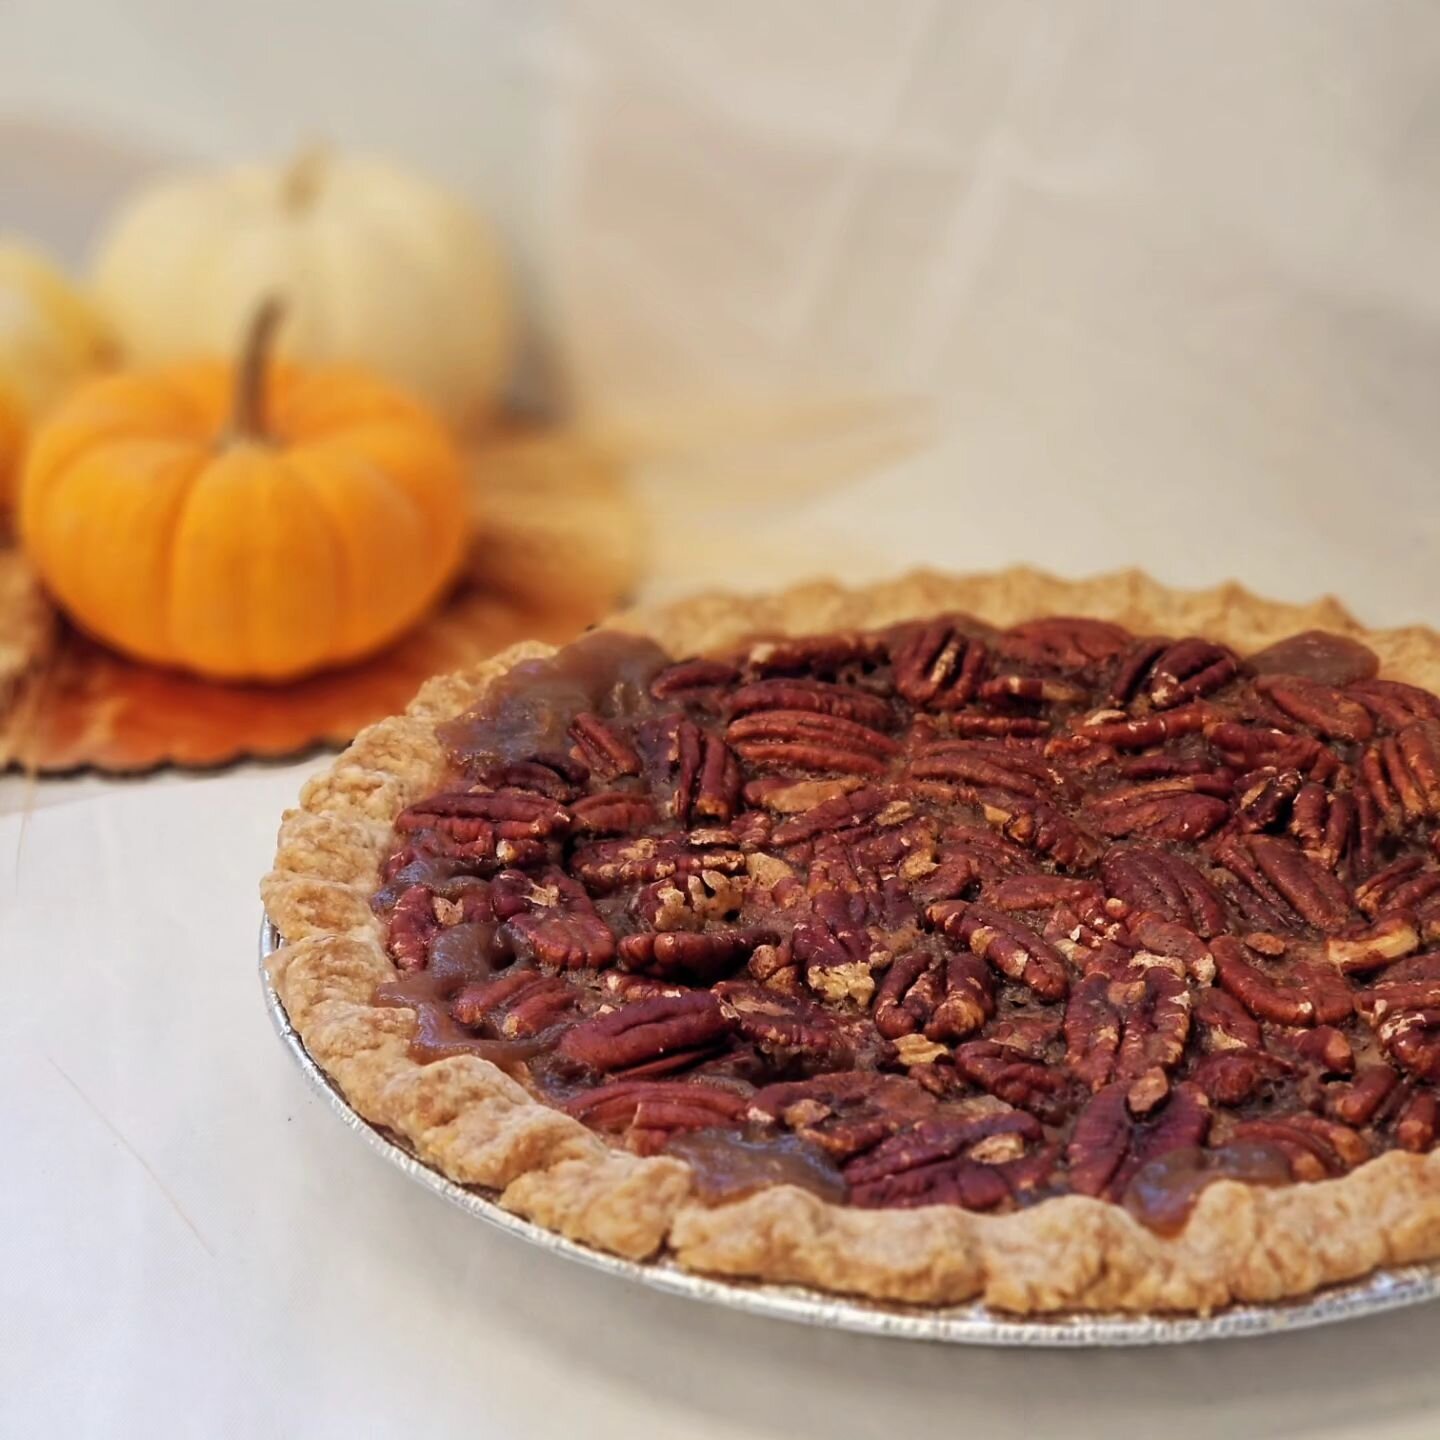 Our delicious Maple Pecan Pie is made with lots of pecans, organic maple syrup and a home-made, hand-rolled crust. 

This vegan pie is hands-down the best pecan pie we've ever had! 

Pre-order by tomorrow (Monday) @ NOON to guarantee your Thanksgivin